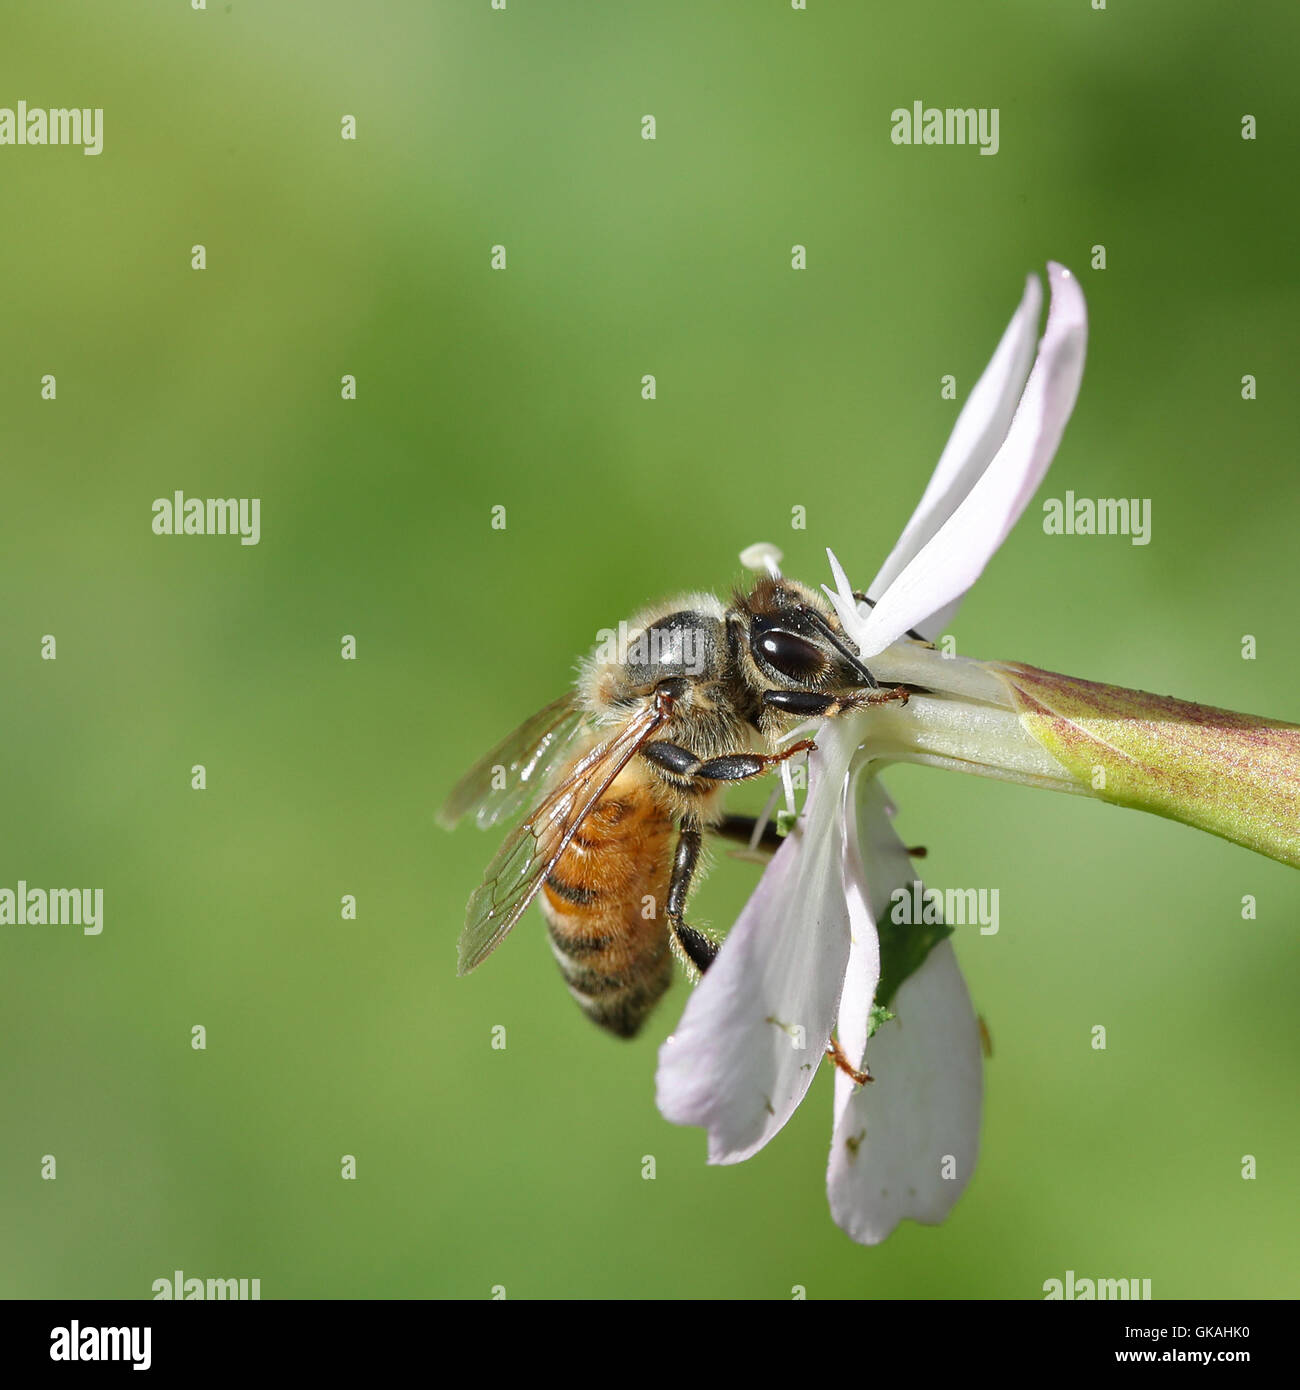 Honeybee on a white wild flower against a blurred green background Stock Photo